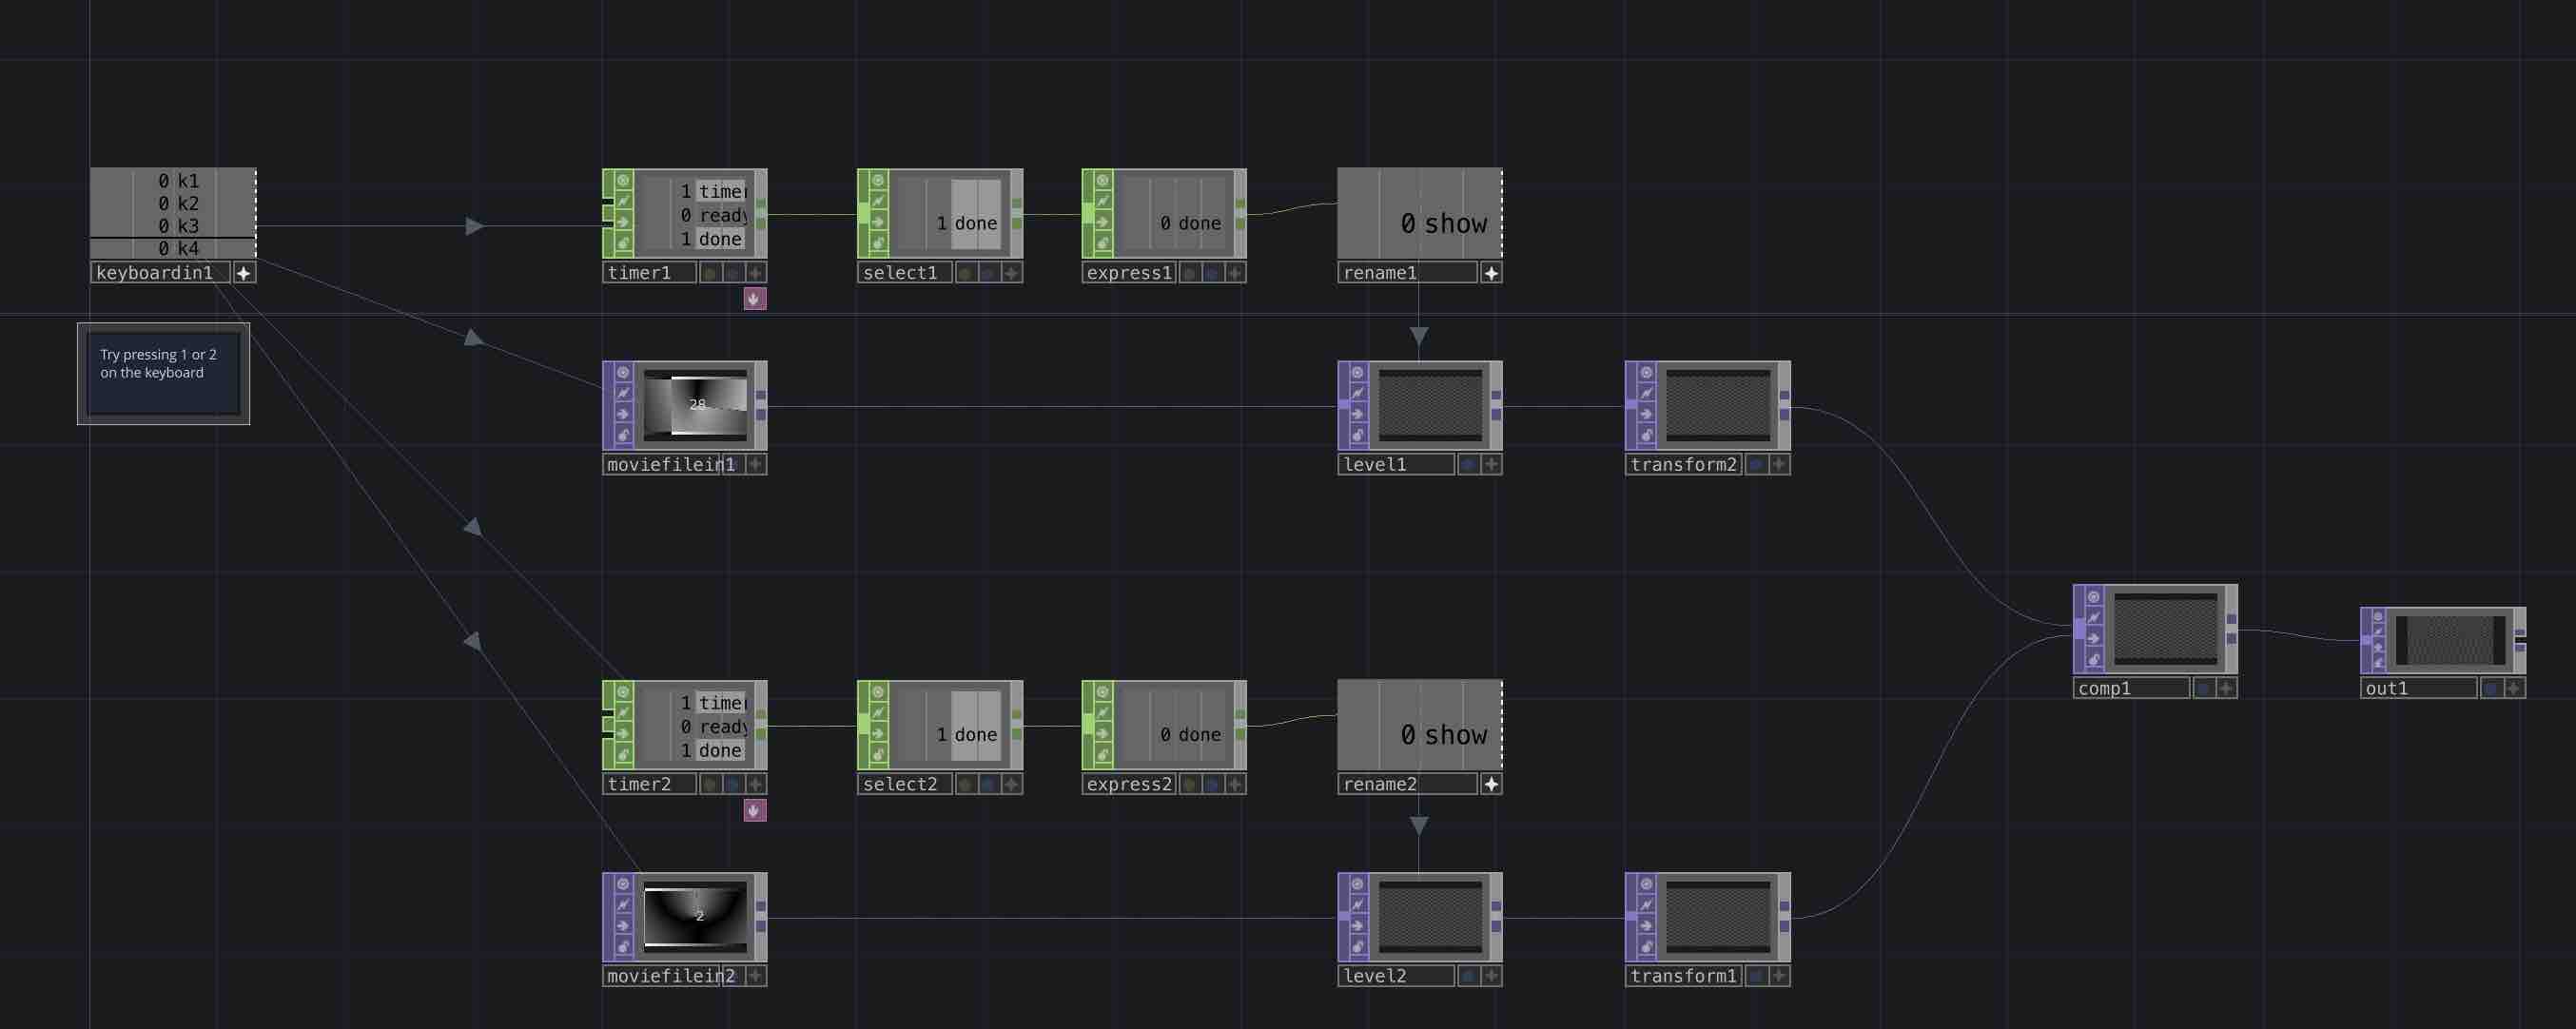 A TouchDesigner file showing a network of video files, who play for a certain amount of time based on keyboard input